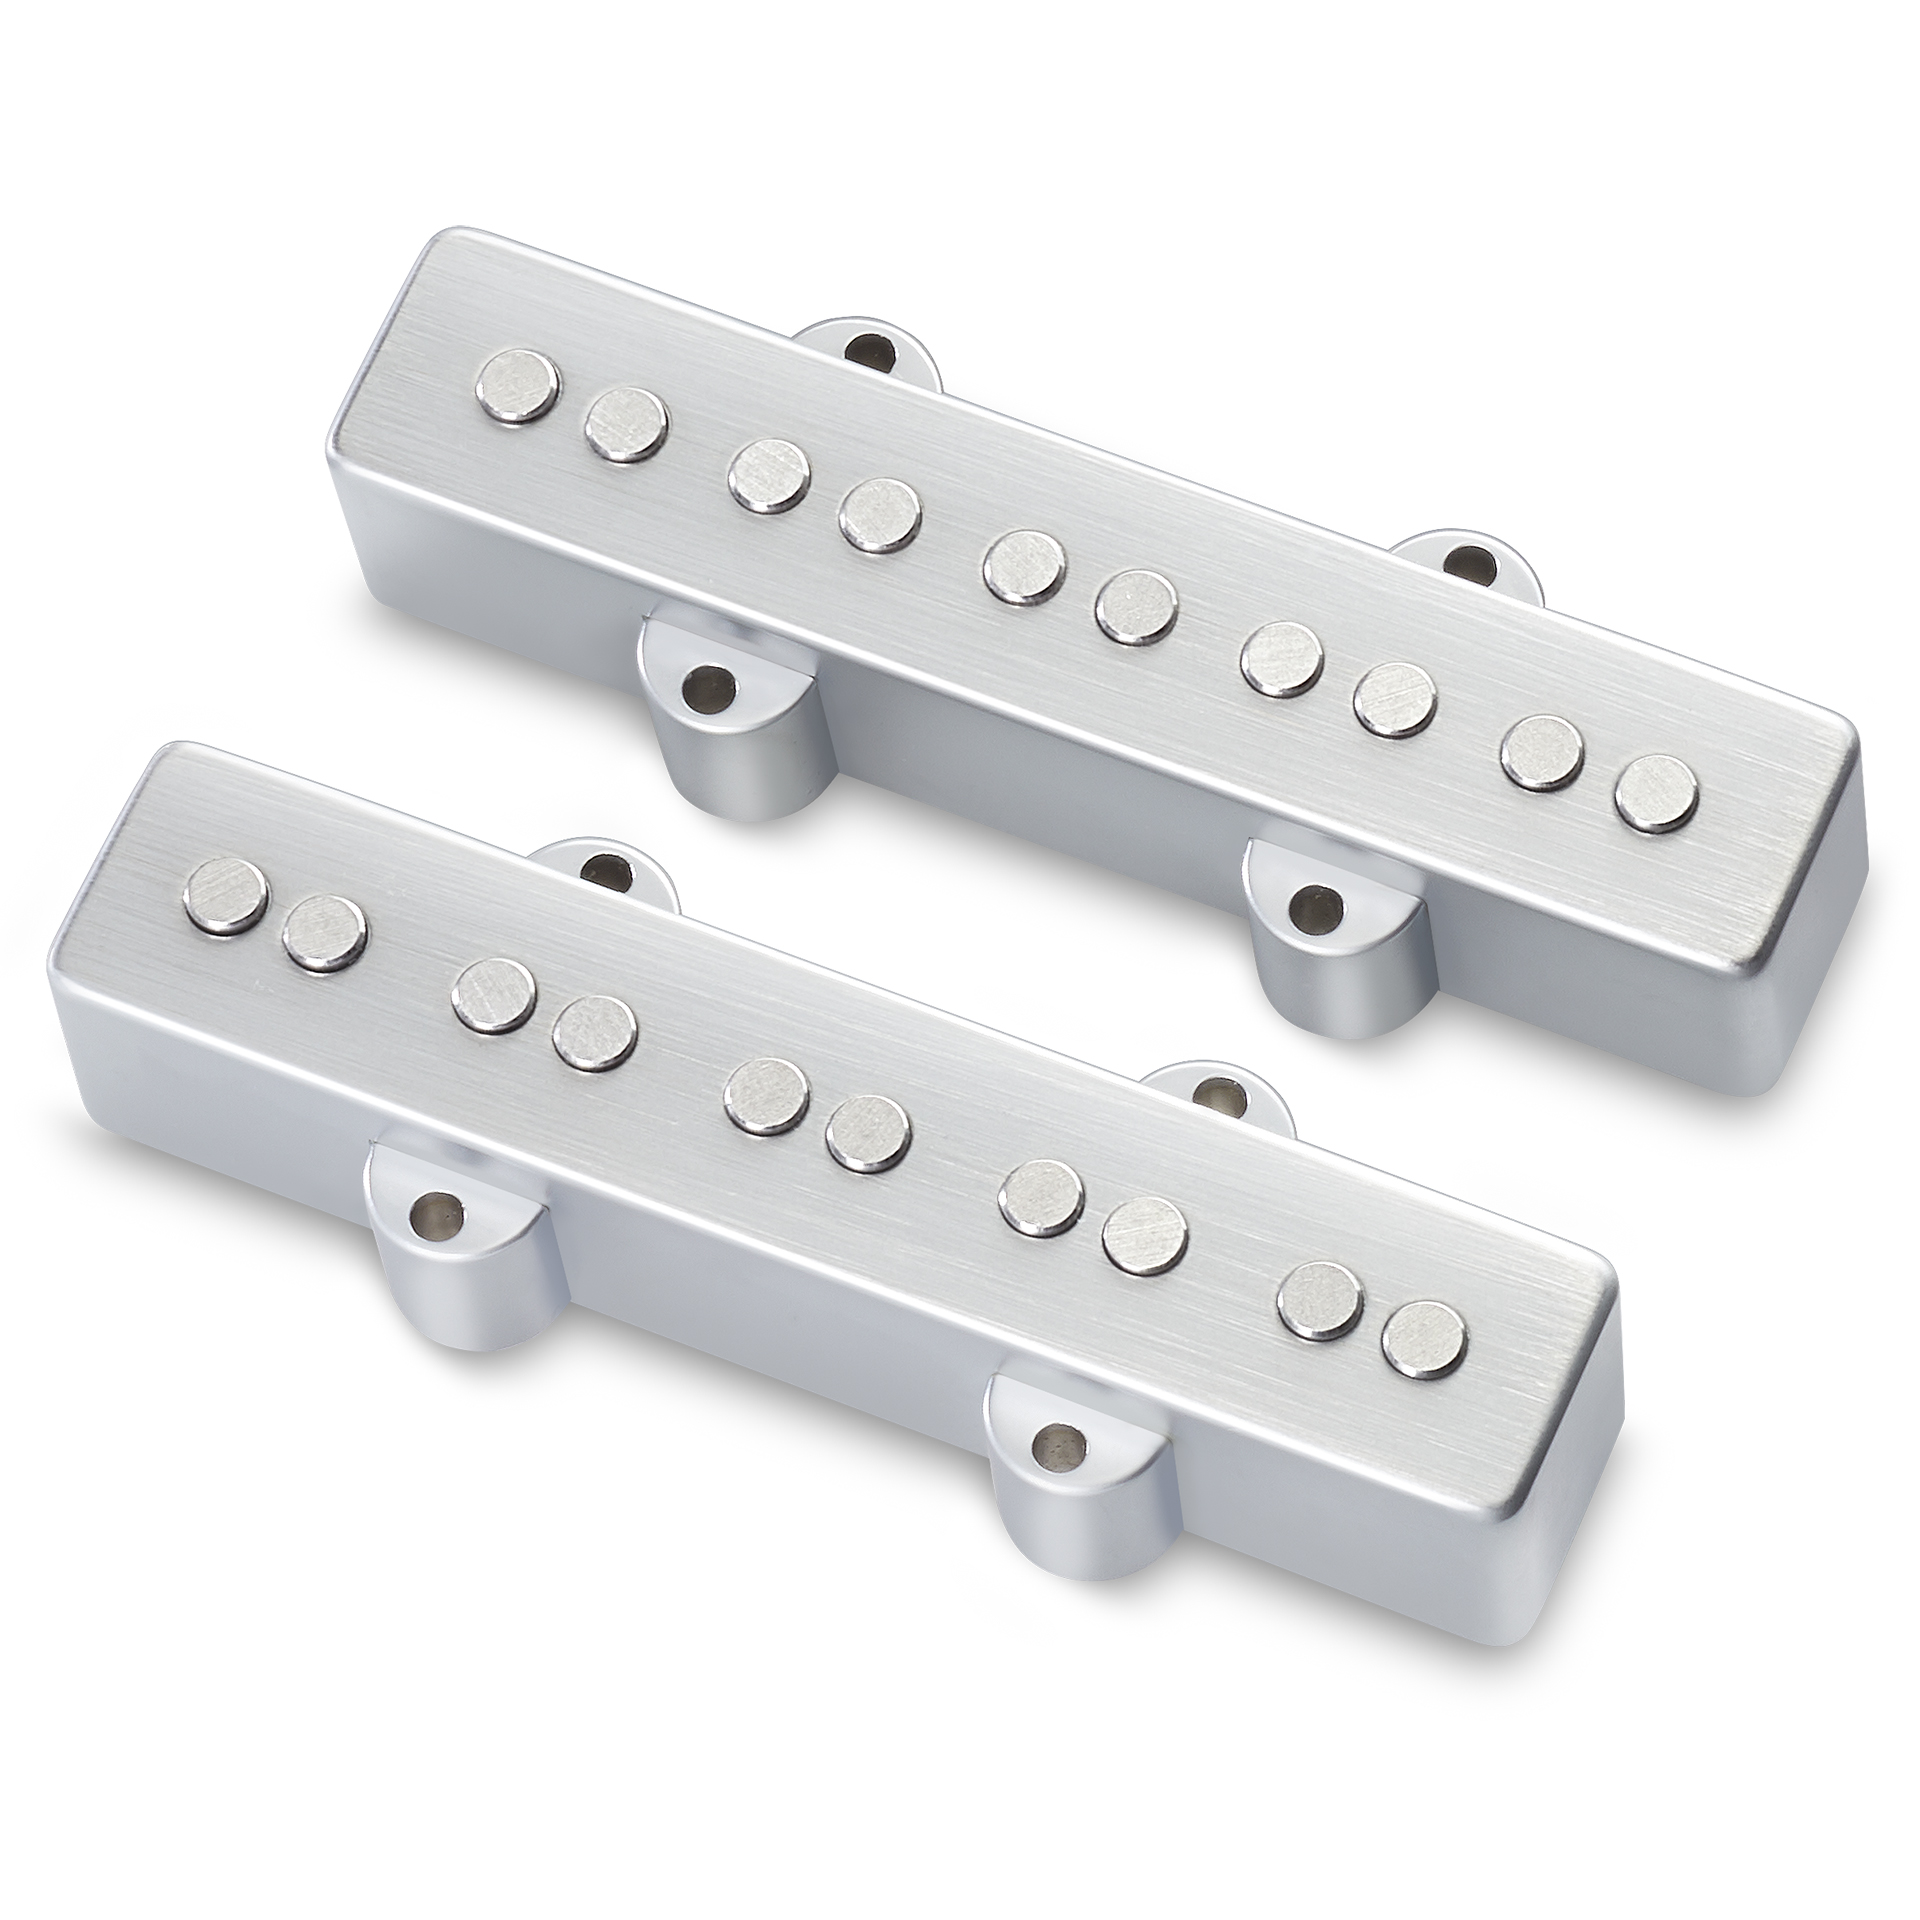 MEC Passive J/J-Style Bass Pickup Set, Metal Cover, Open Pole Pieces, 5-String - Brushed Chrome